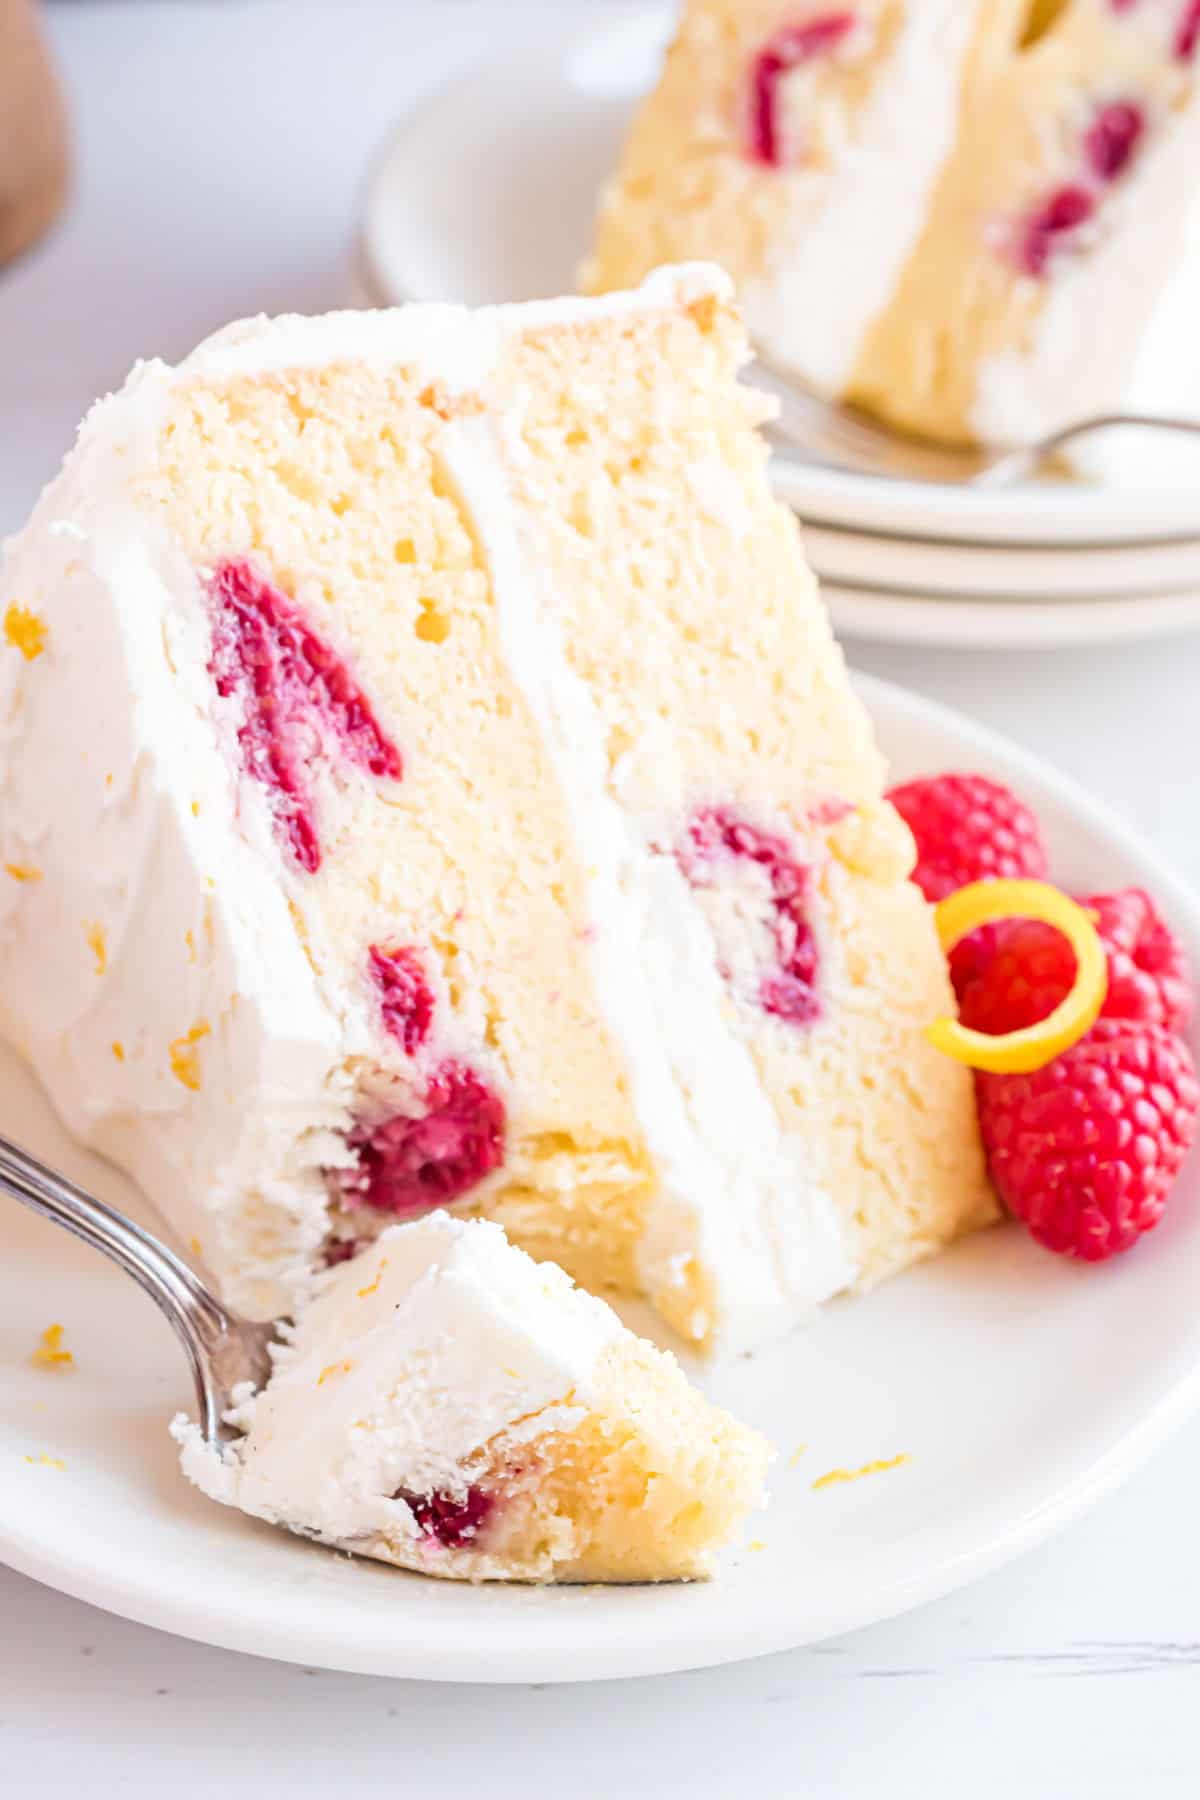 Slice of cake with raspberries with a bite taken out.